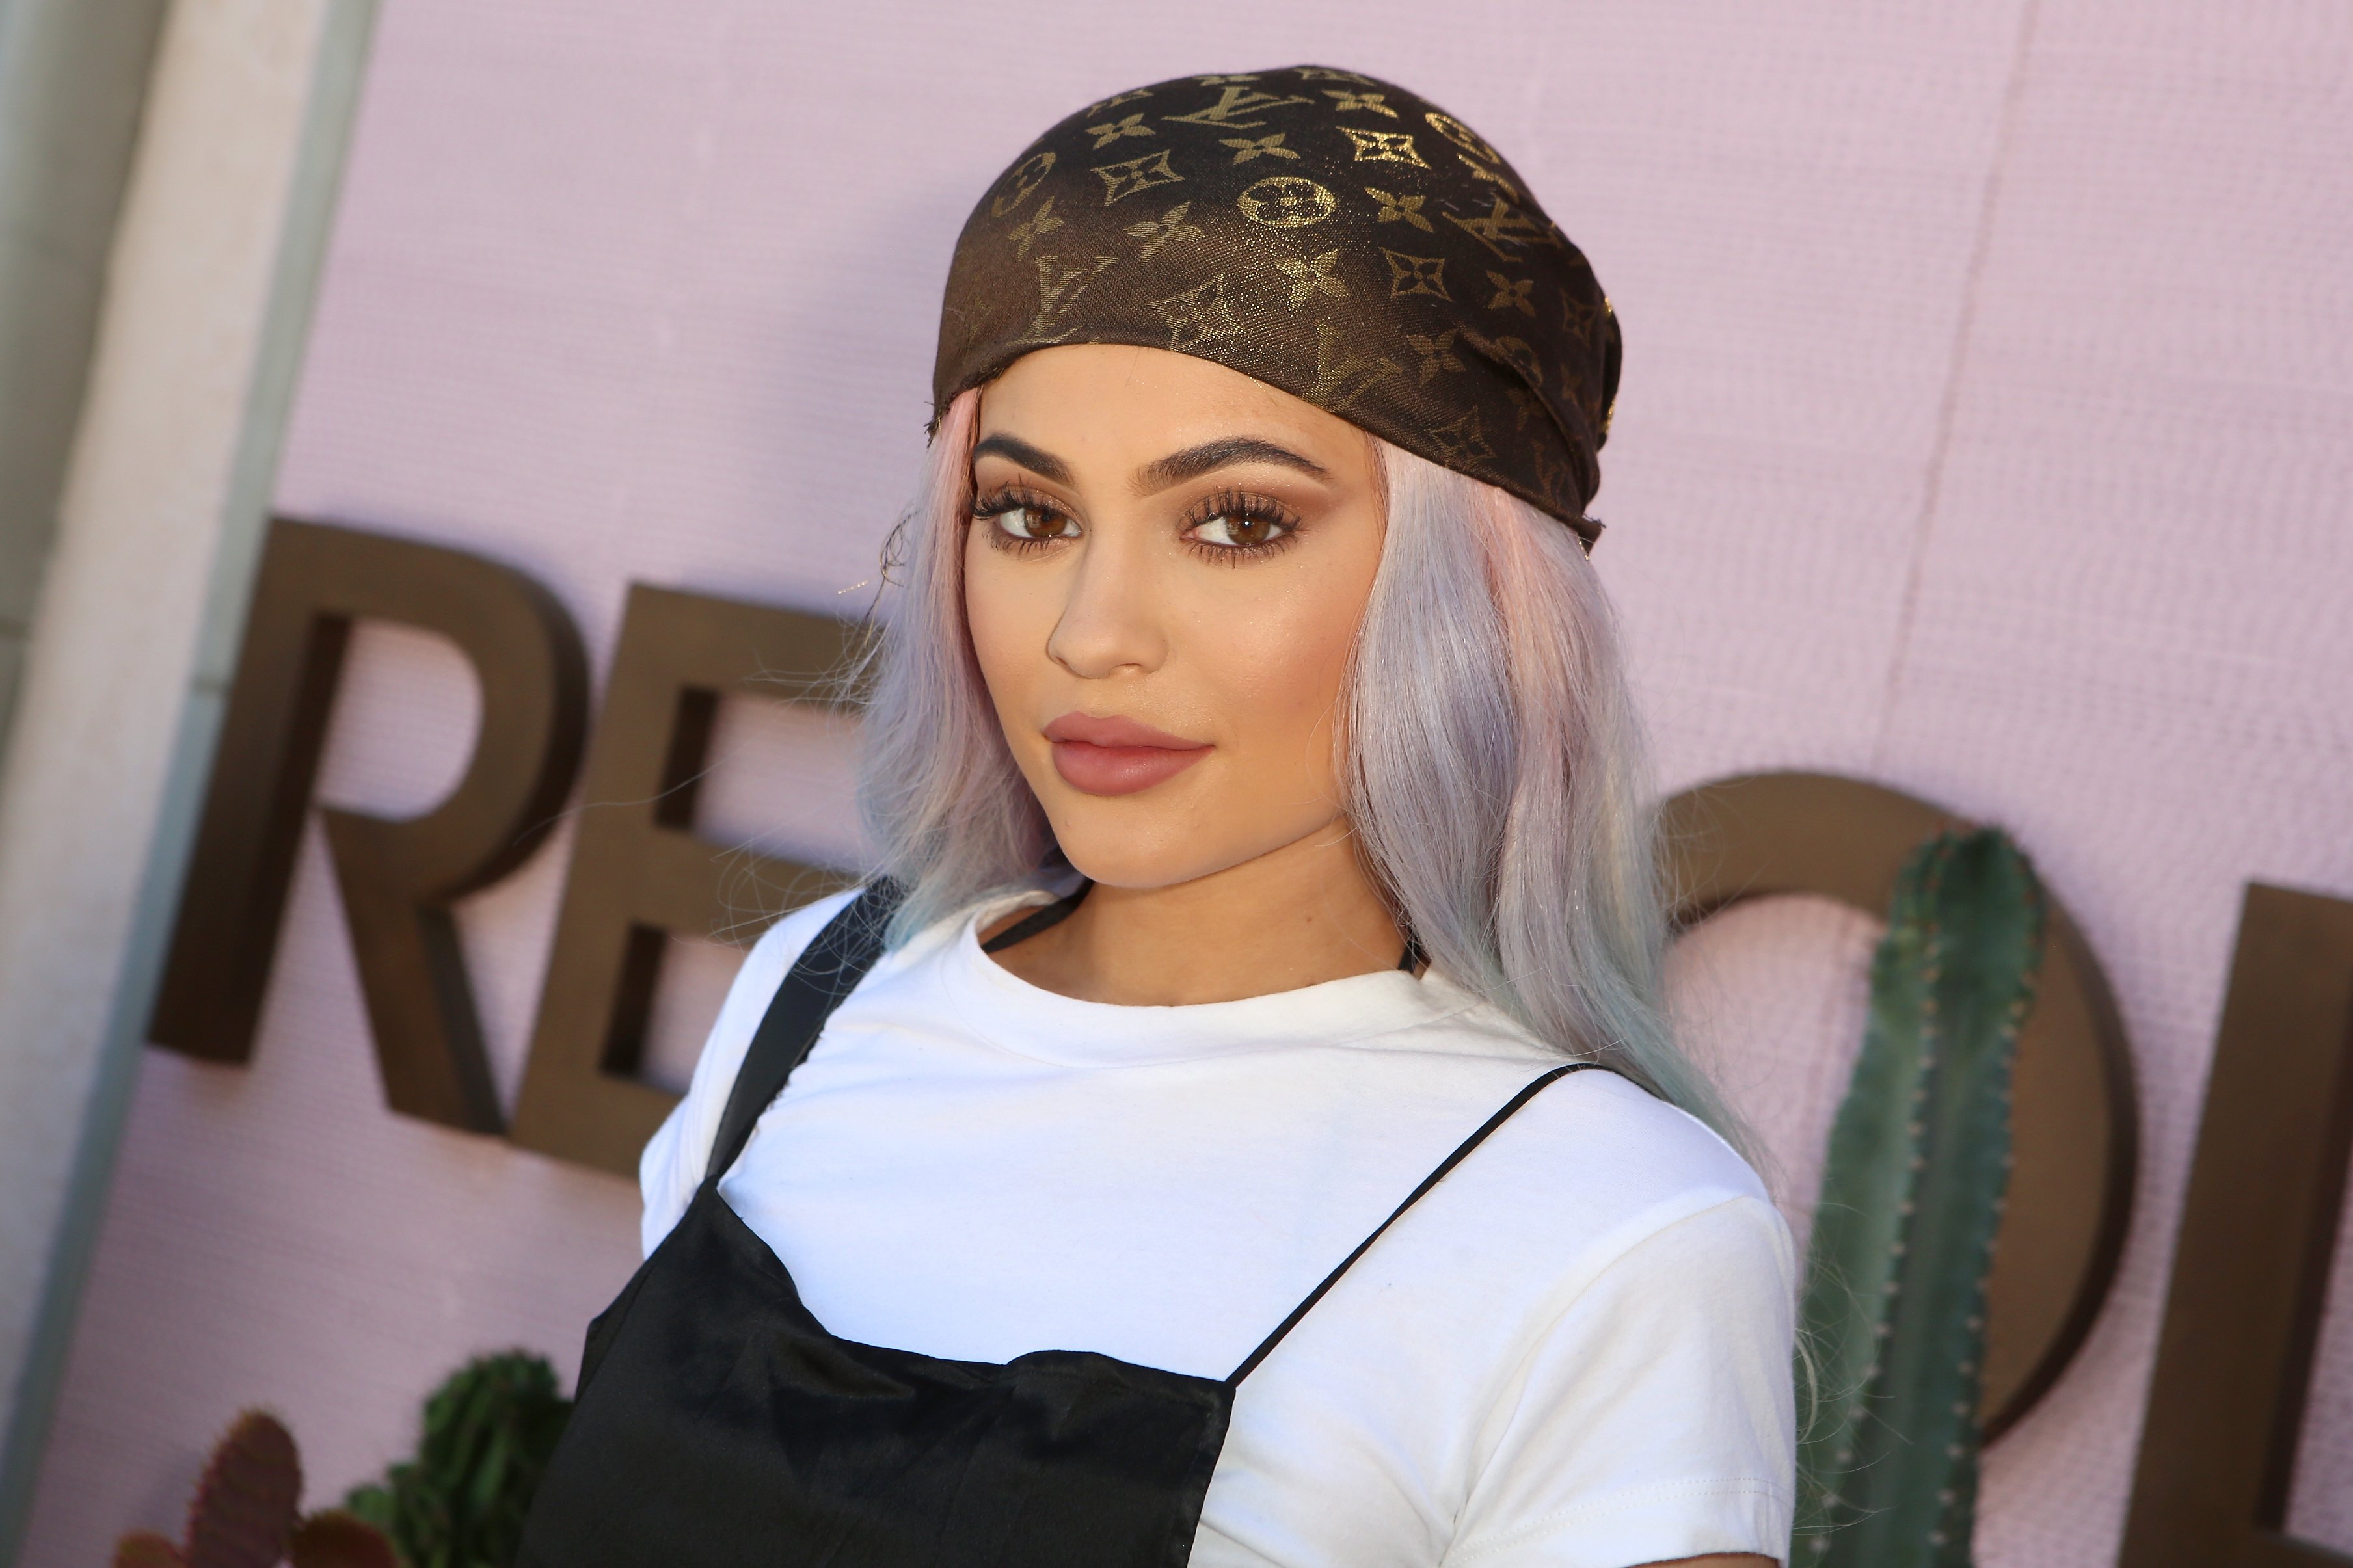  Kylie Jenner attends REVOLVE Desert House on April 17, 2016 at on April 17, 2016. | Photo: Getty Images 